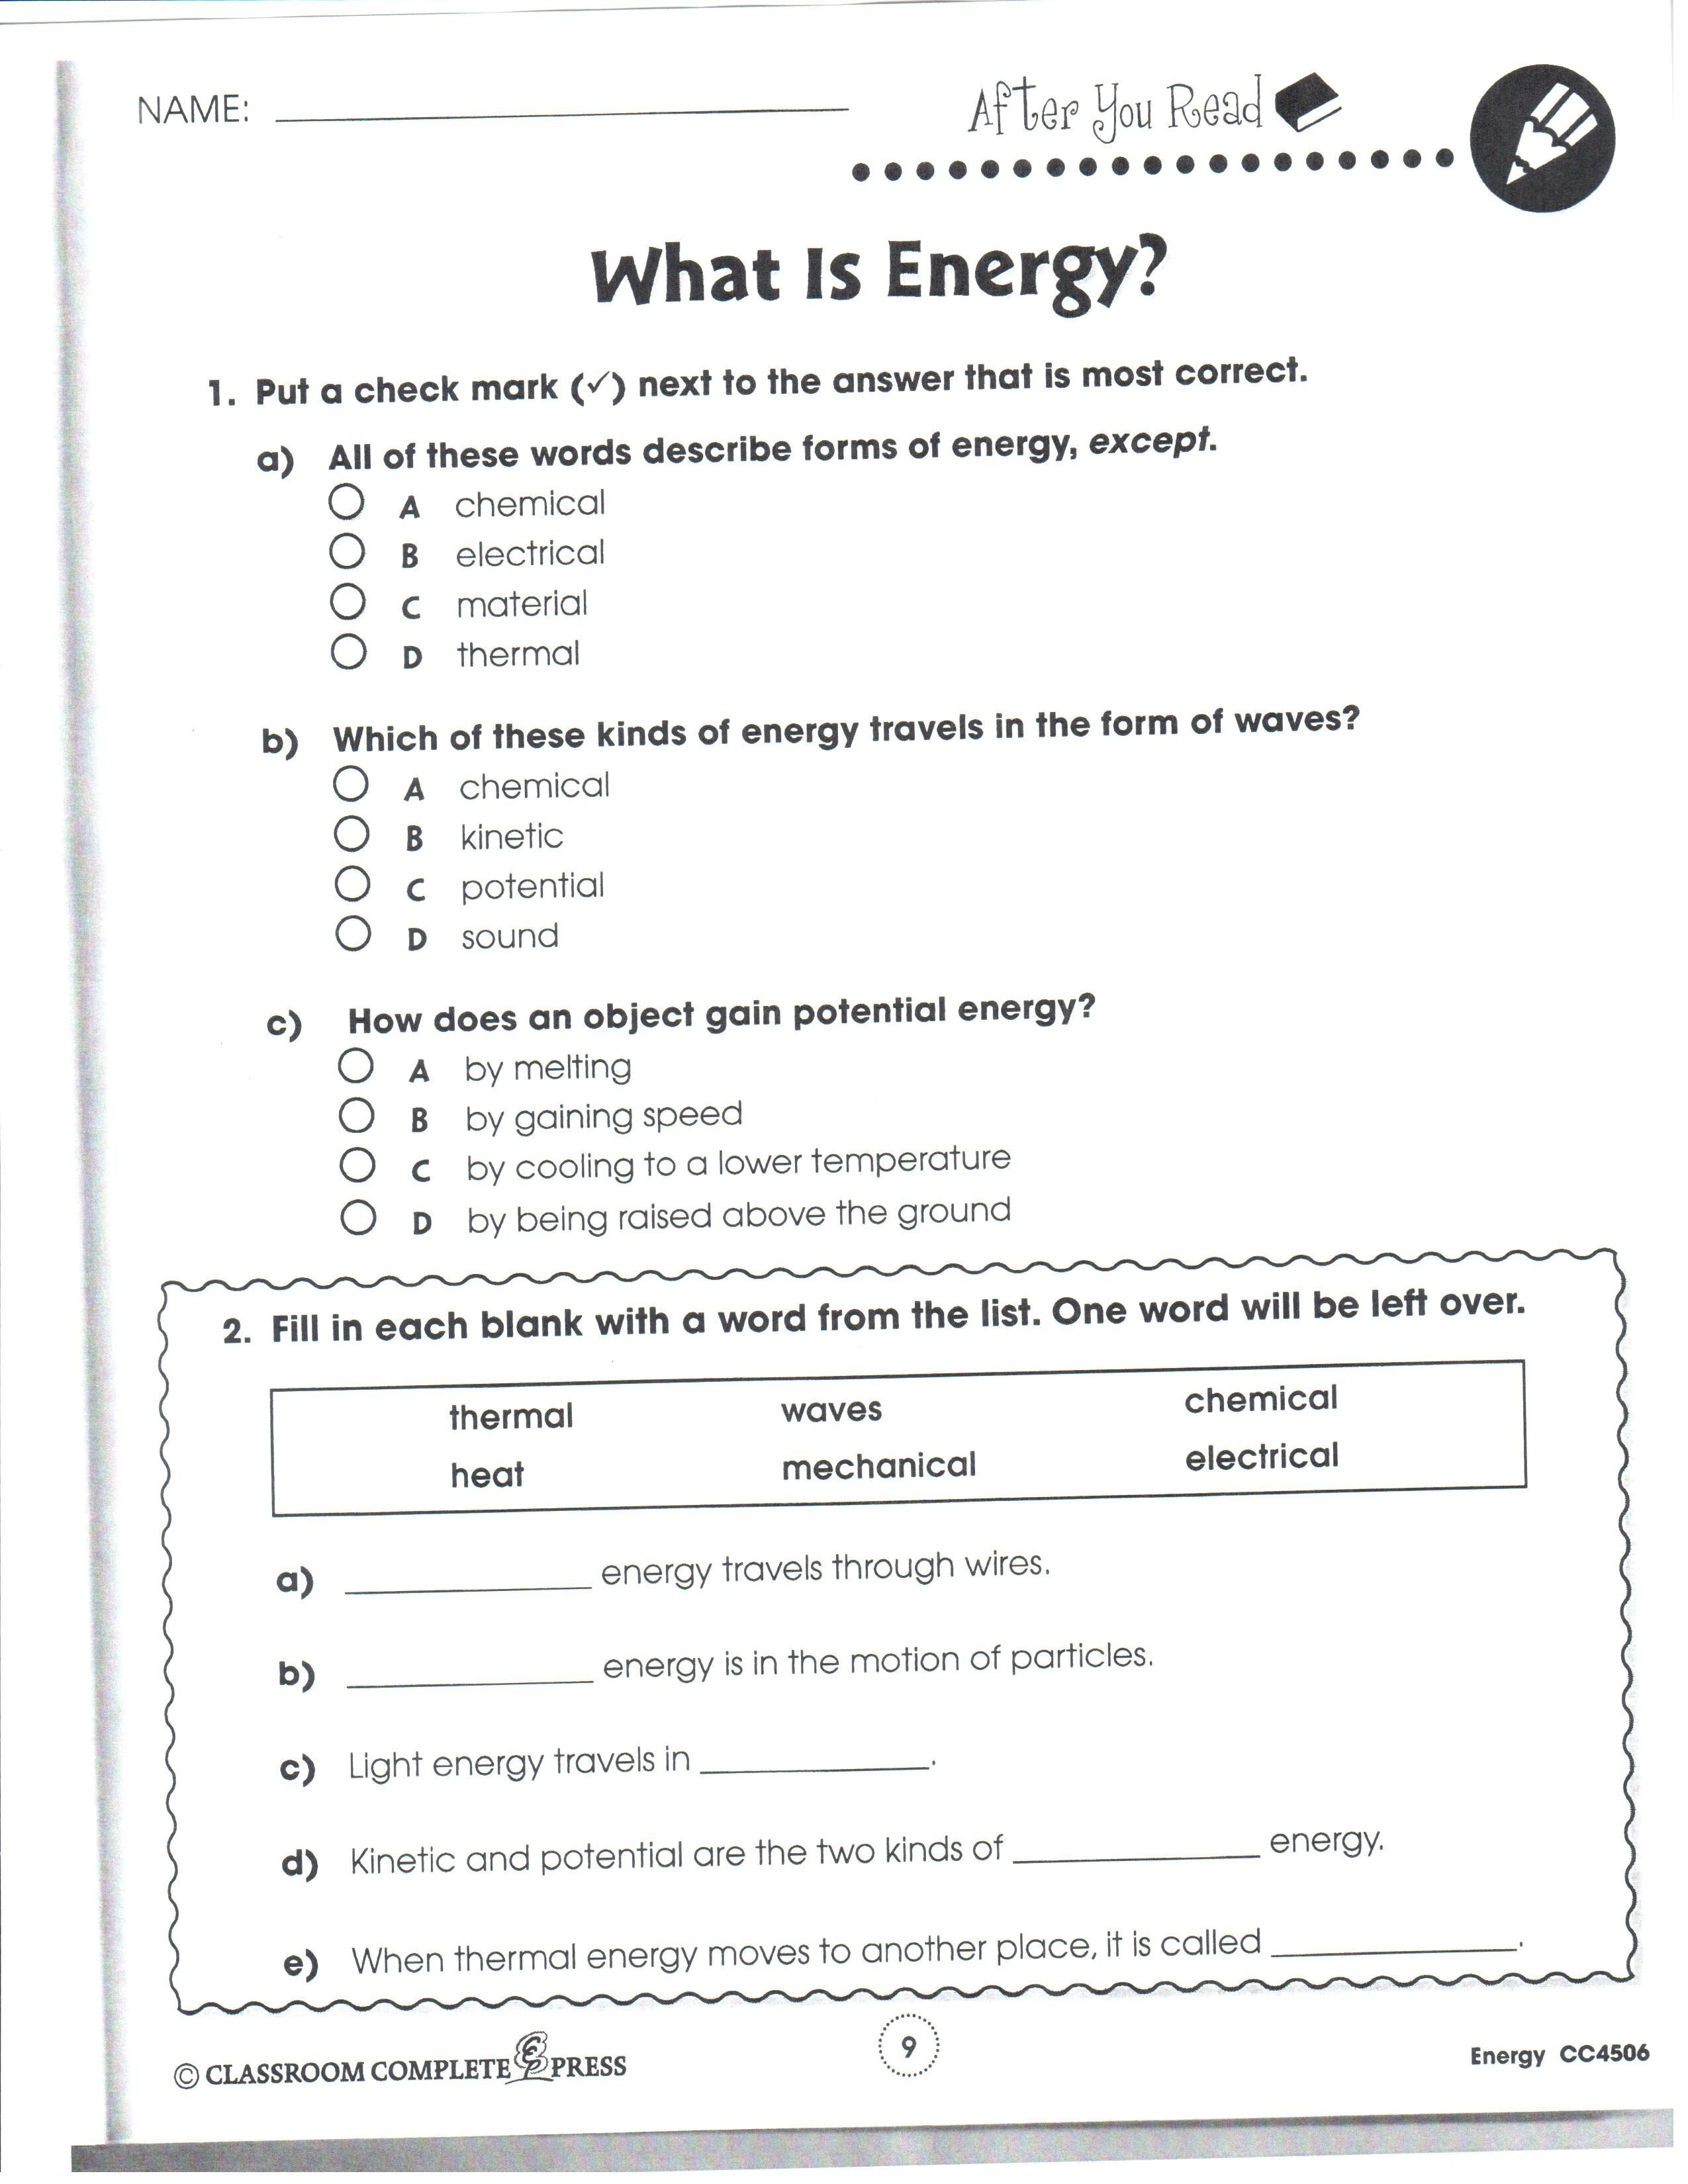 Adult Literacy Worksheets - Siteraven - Free Printable Literacy Worksheets For Adults